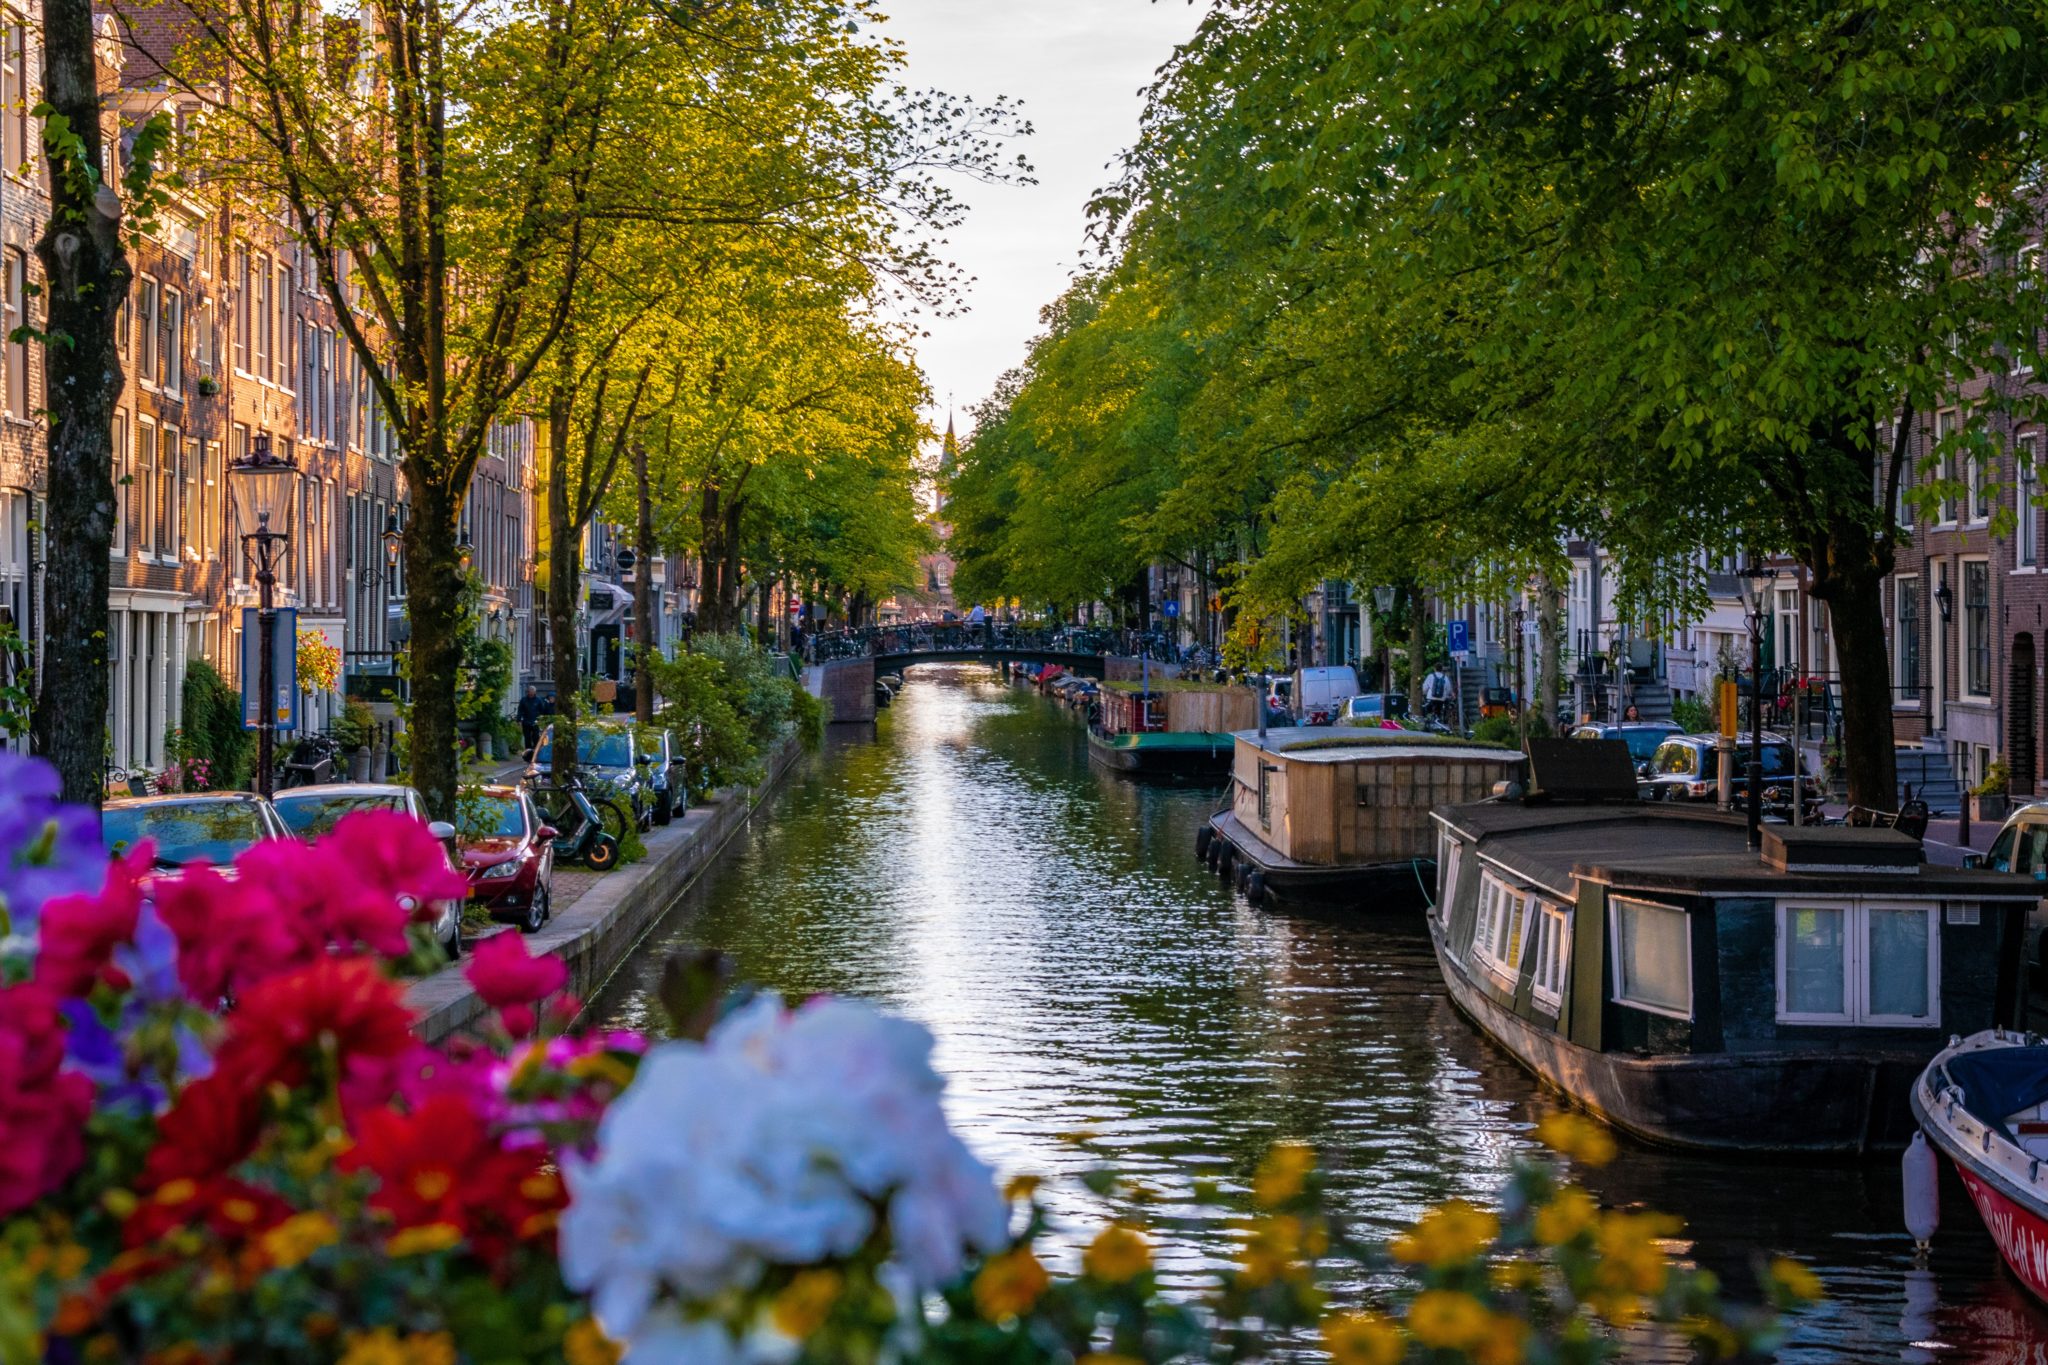 The canals of Amsterdam in the summer.